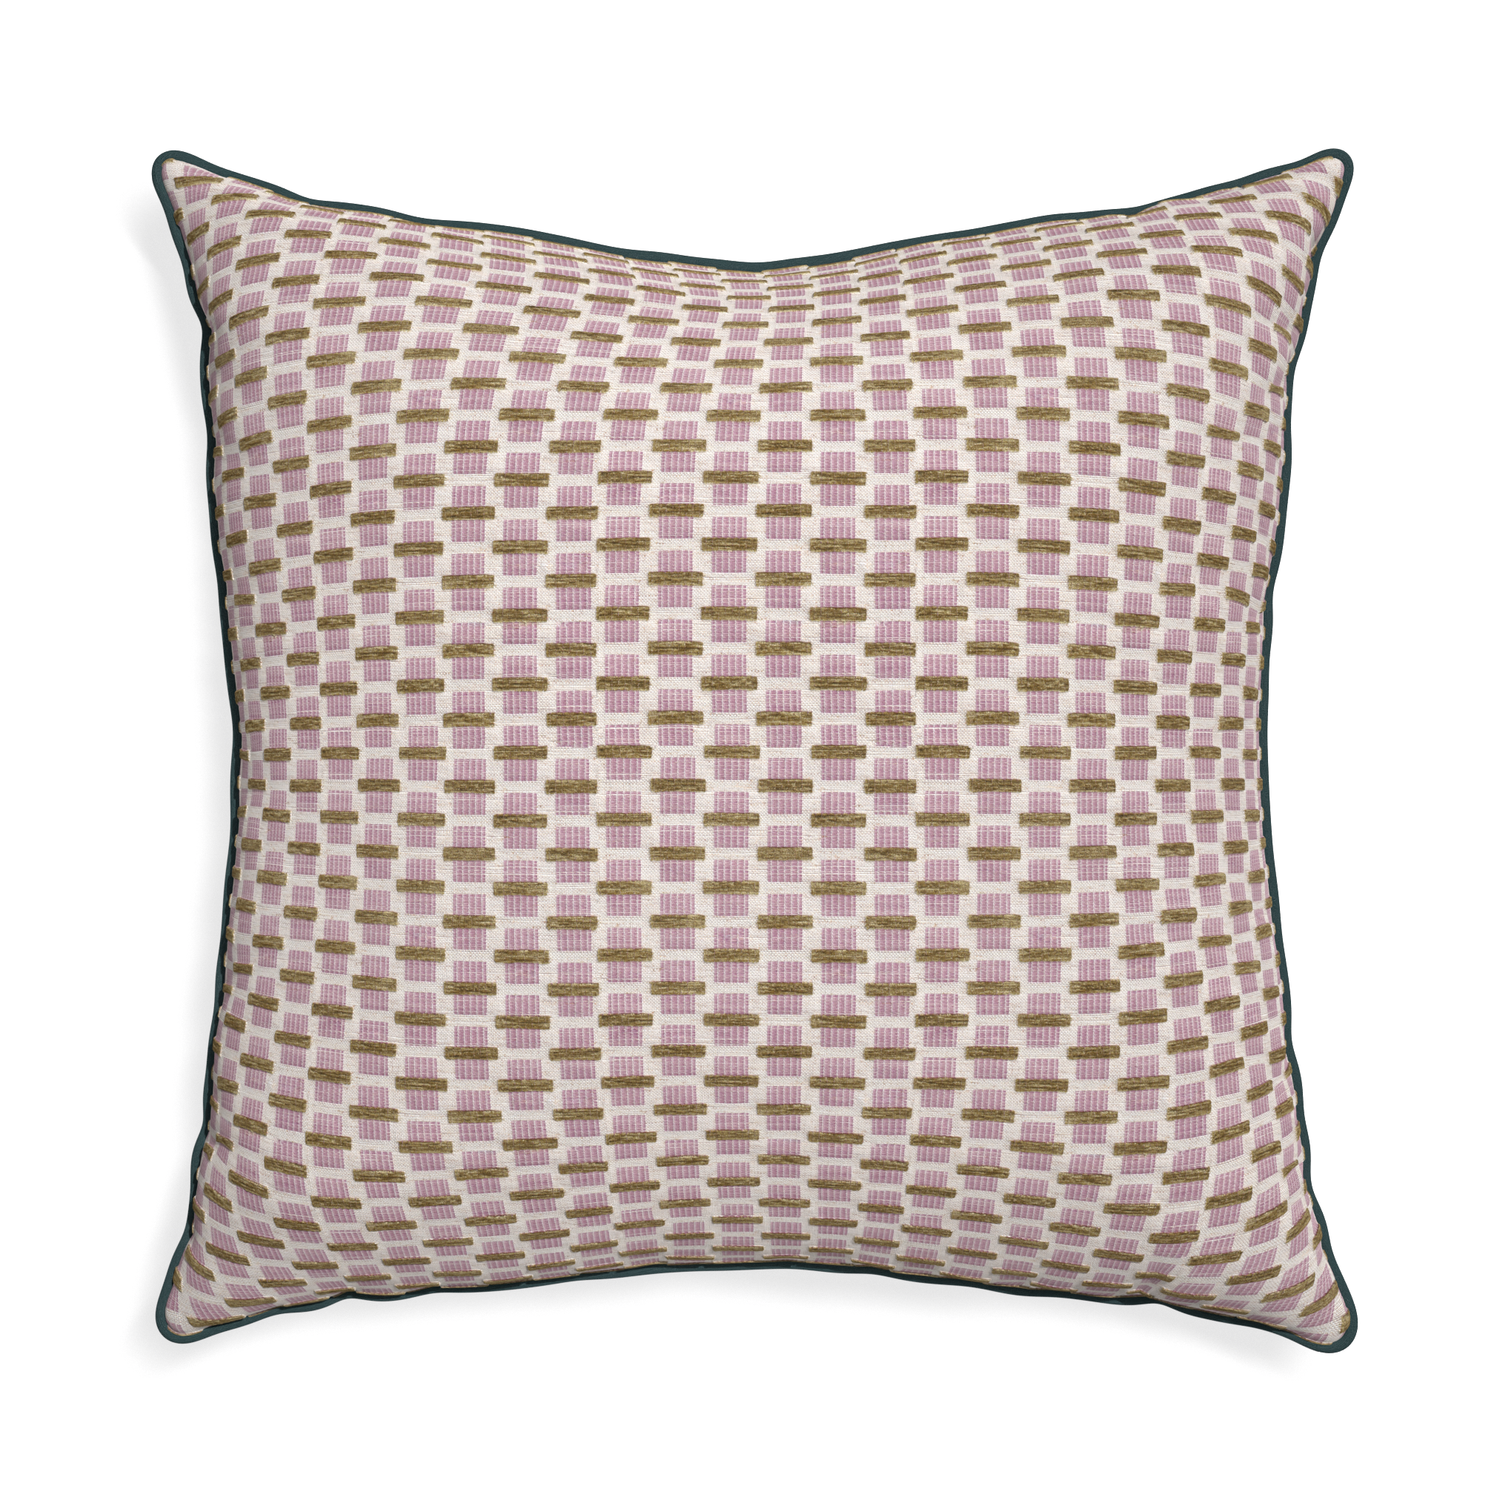 woven pink chenille jacquard pillow with teal piping